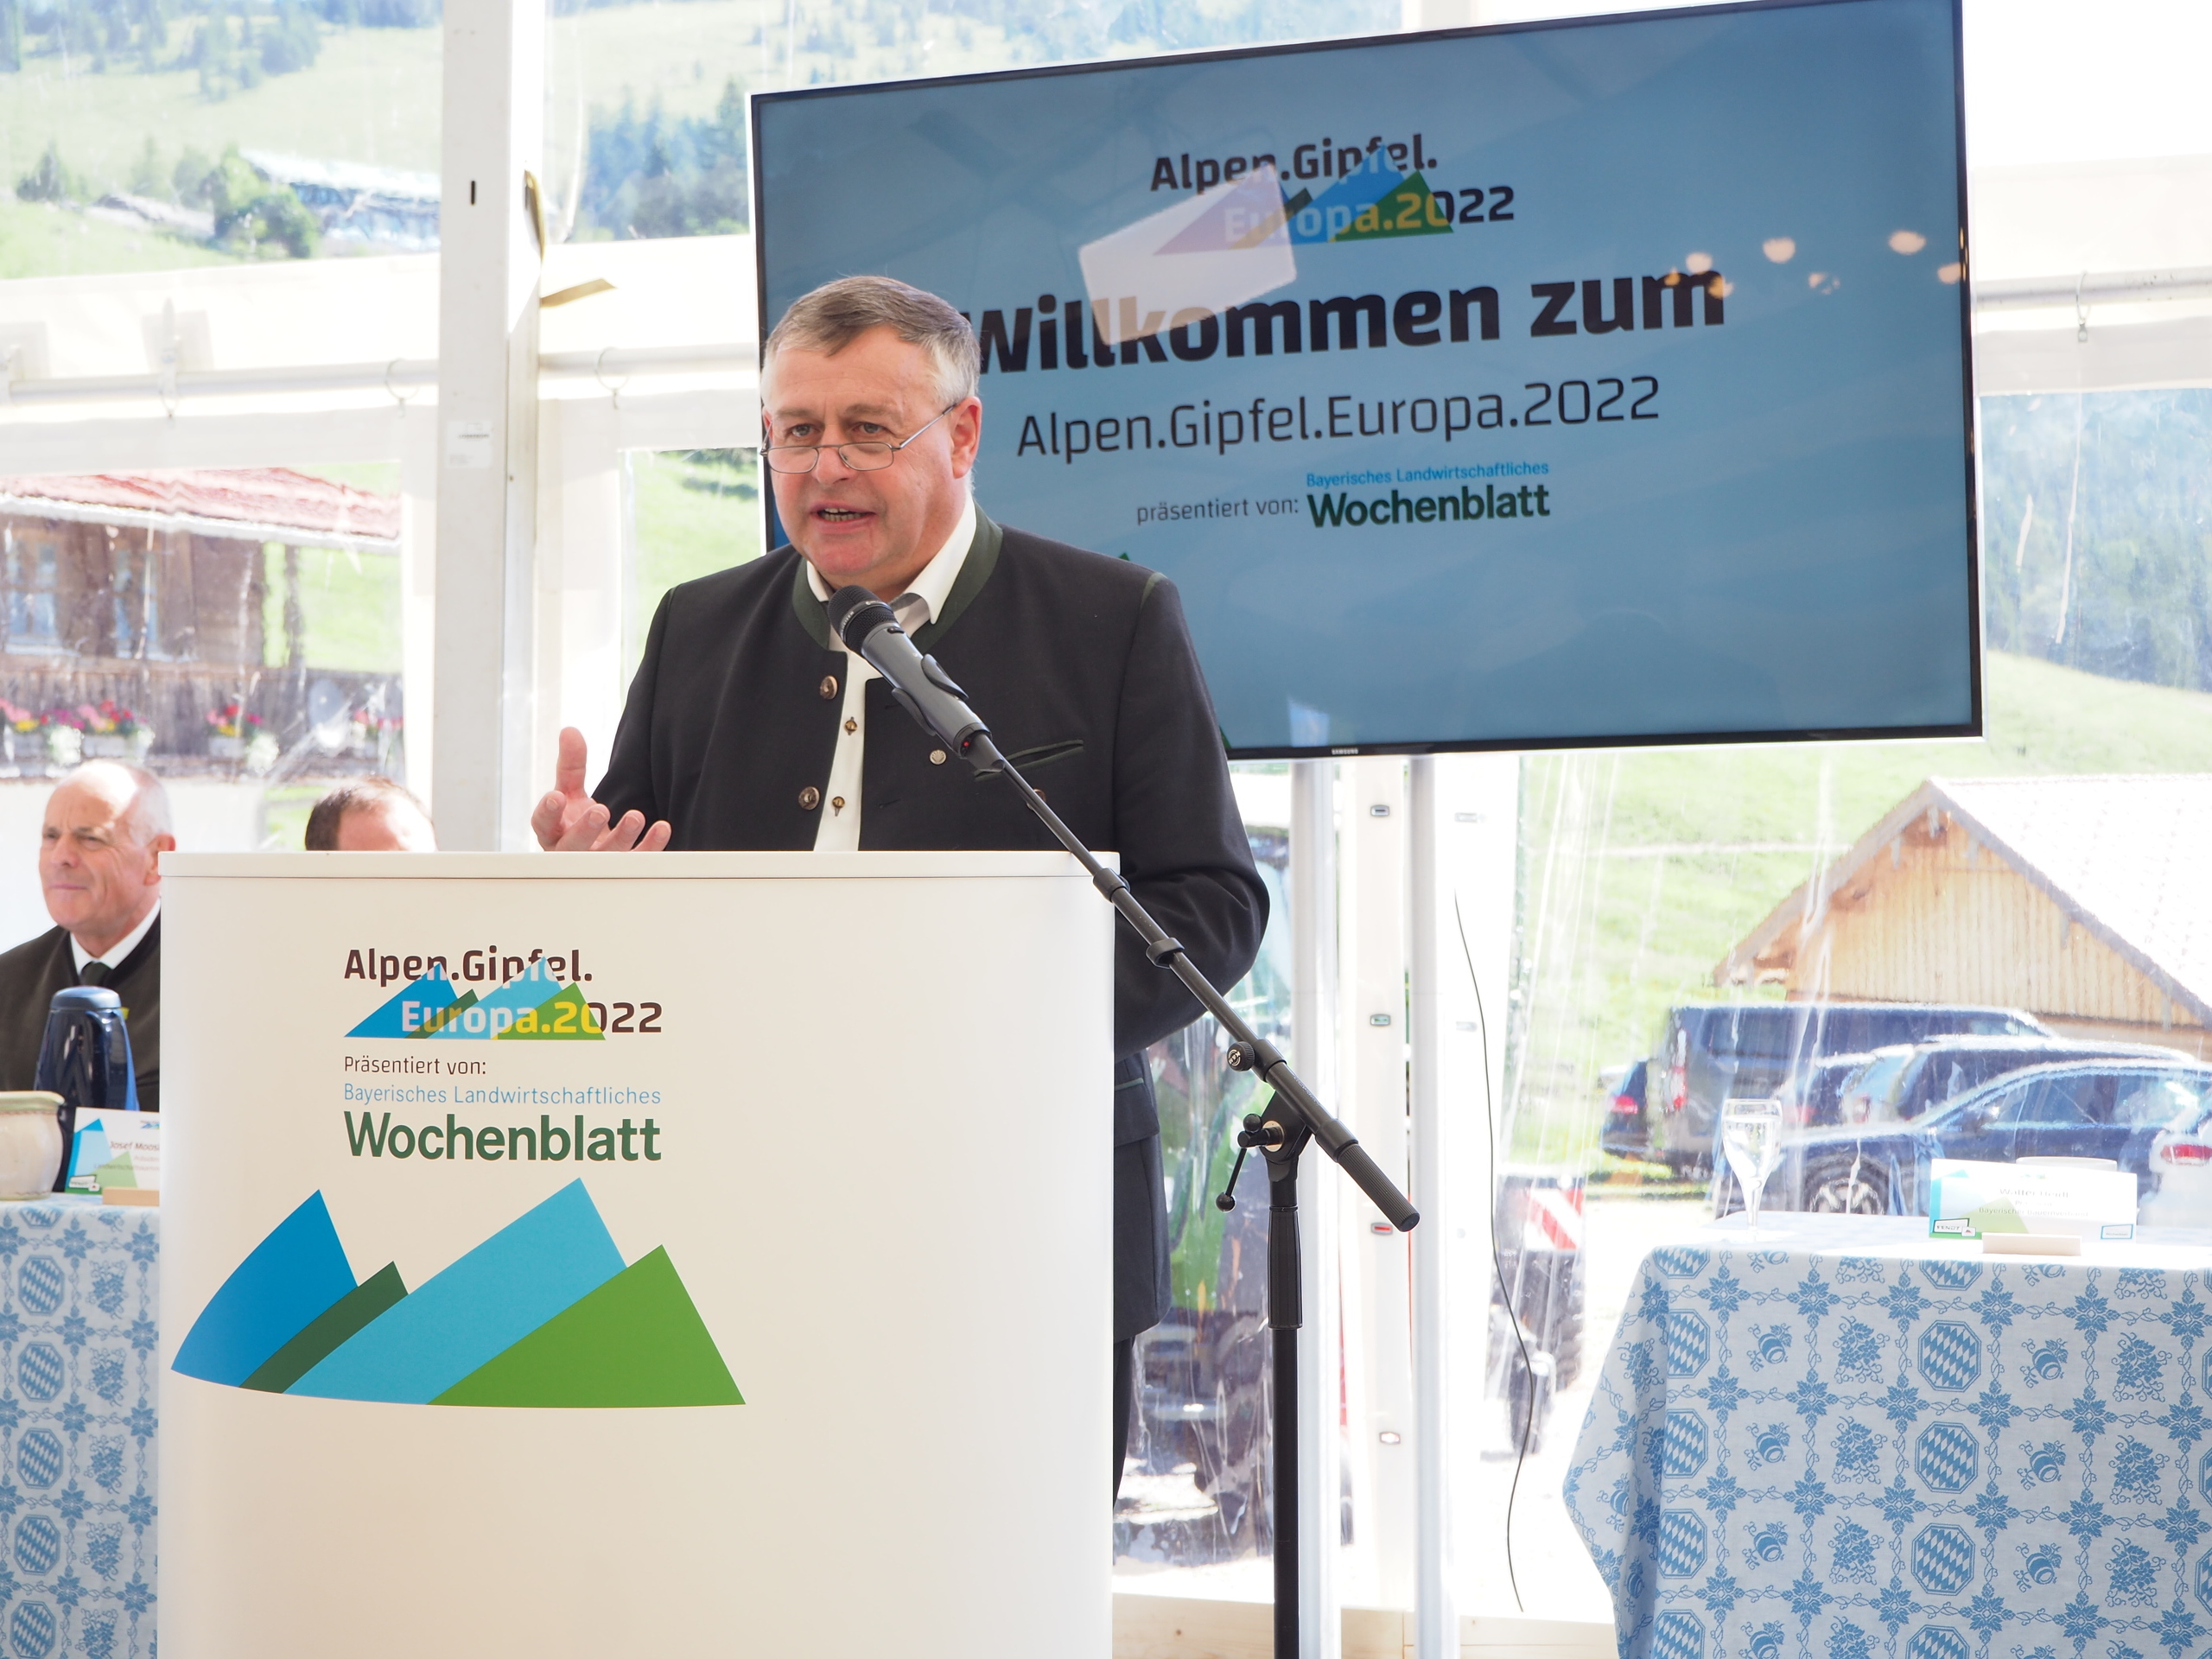 Alps.Summit.Europe.2022 - a summit for mountain agriculture